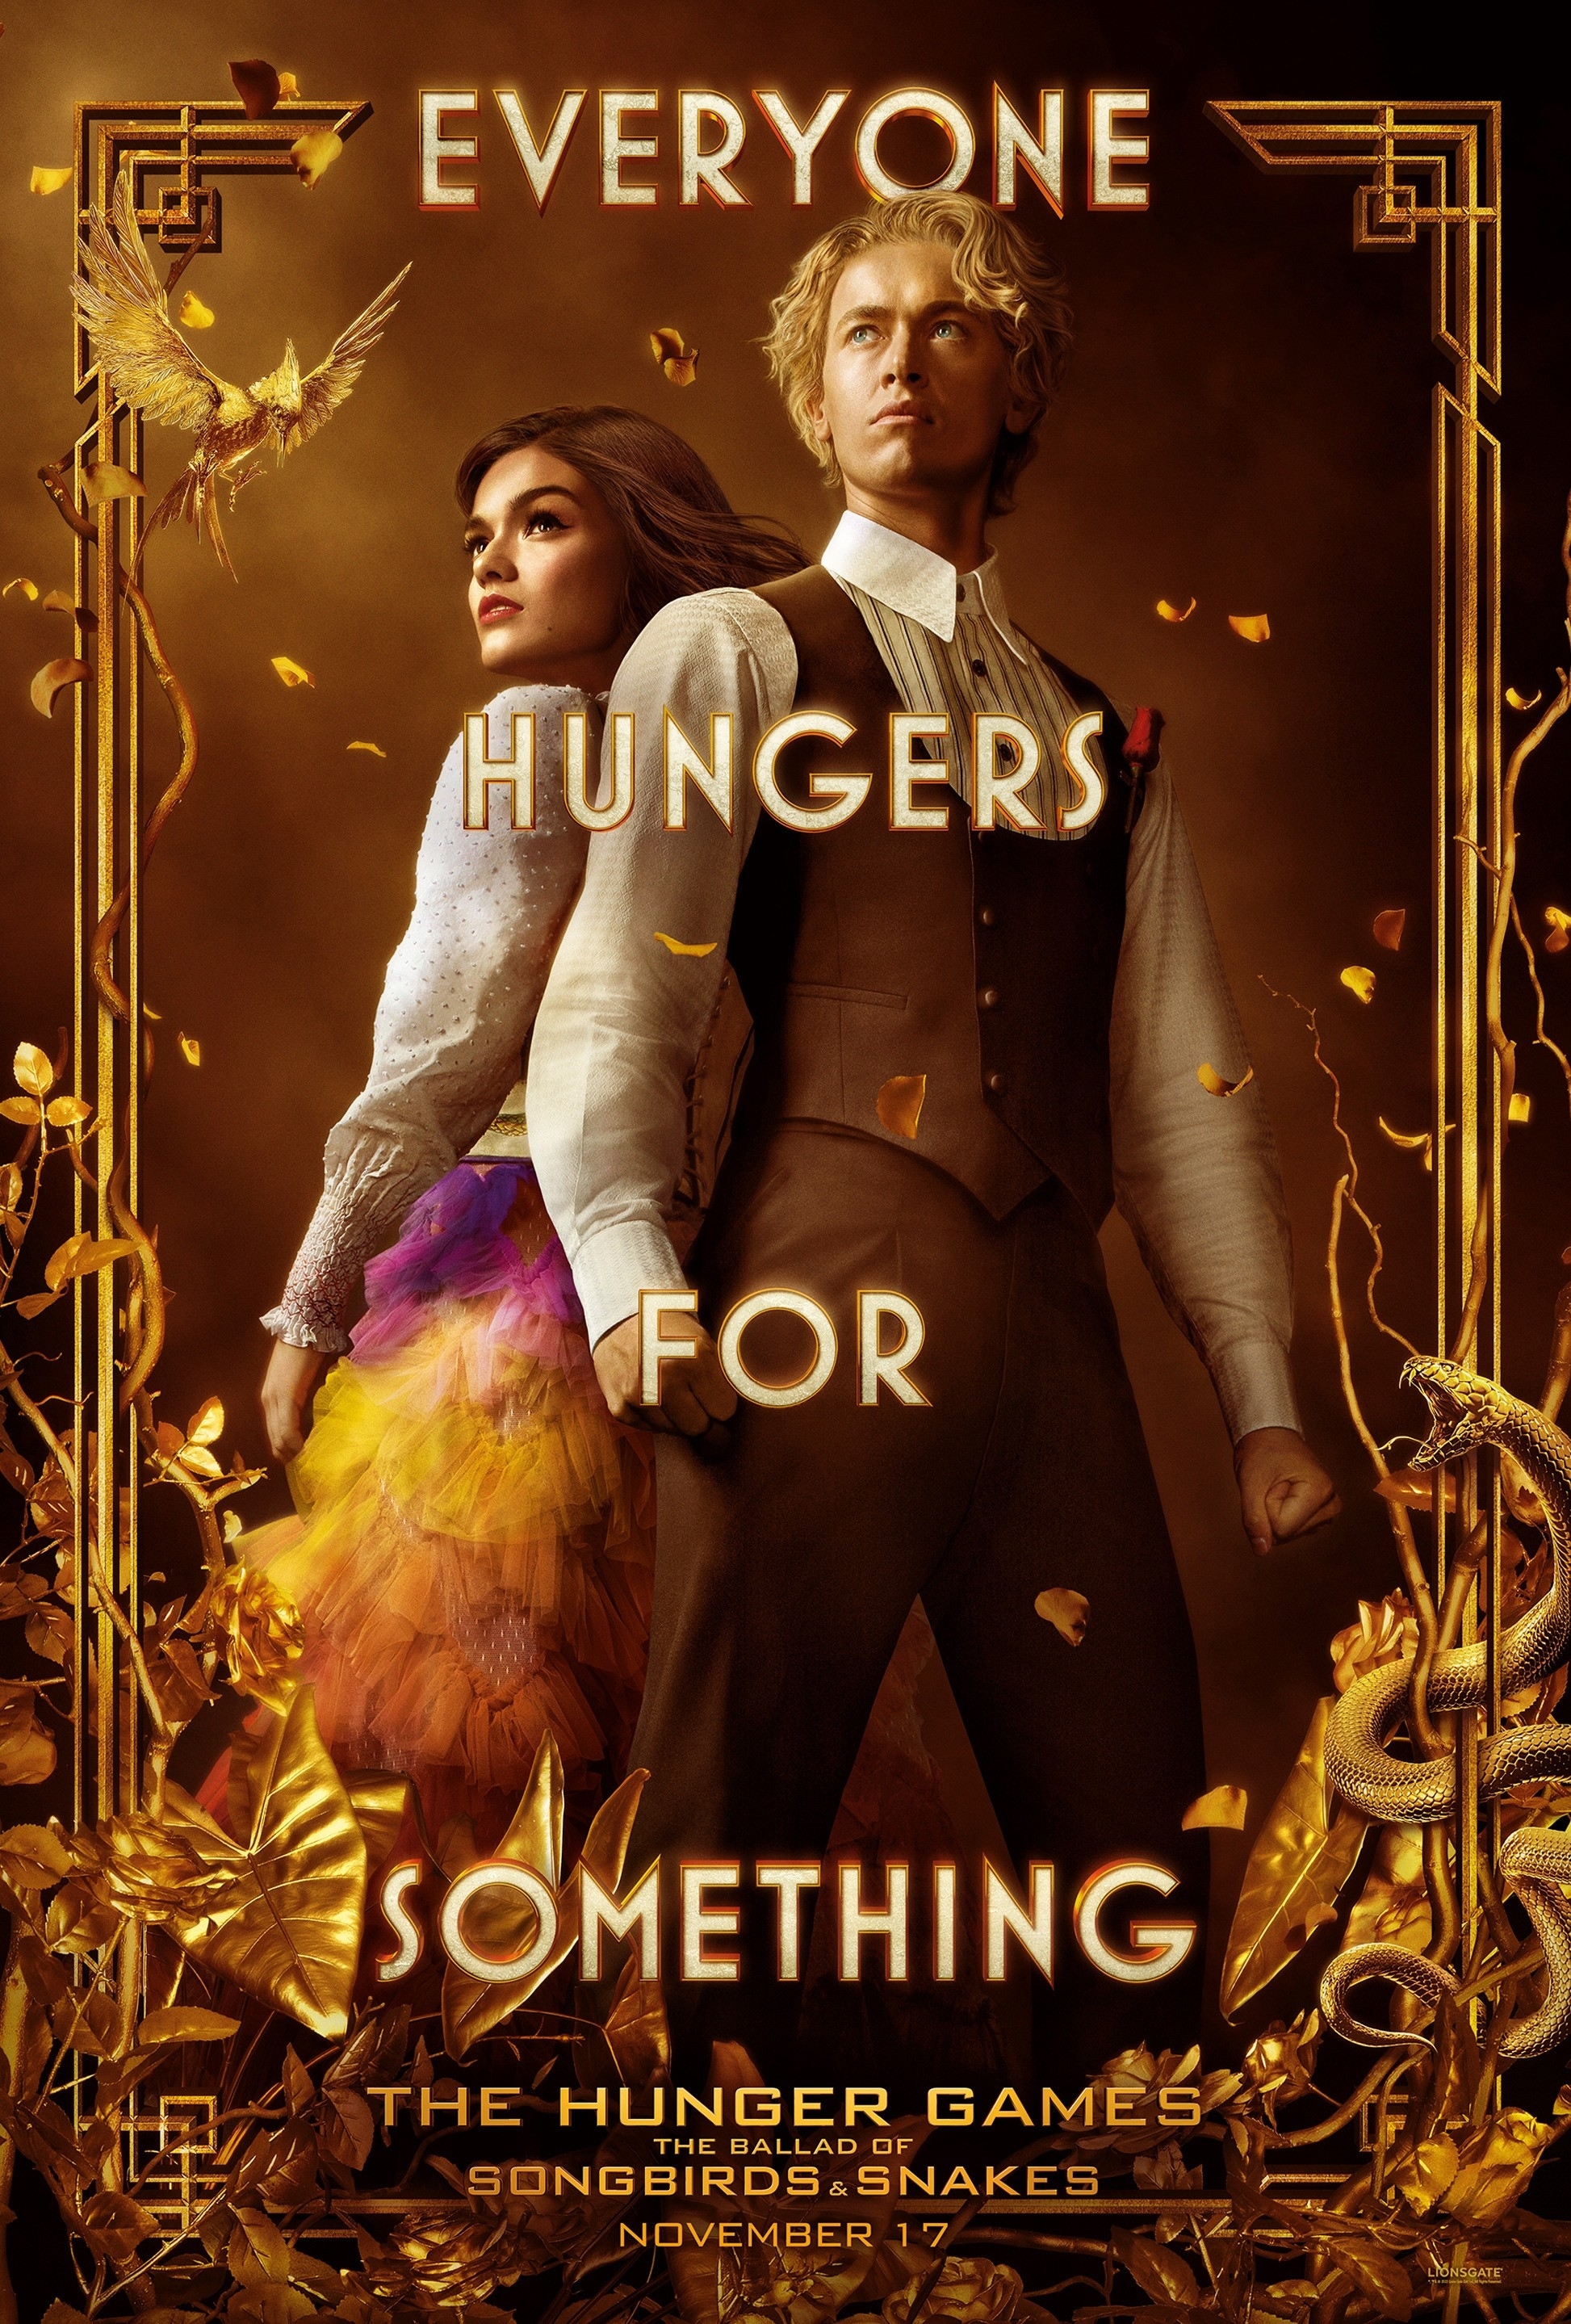 The poster for the new Hunger Games film